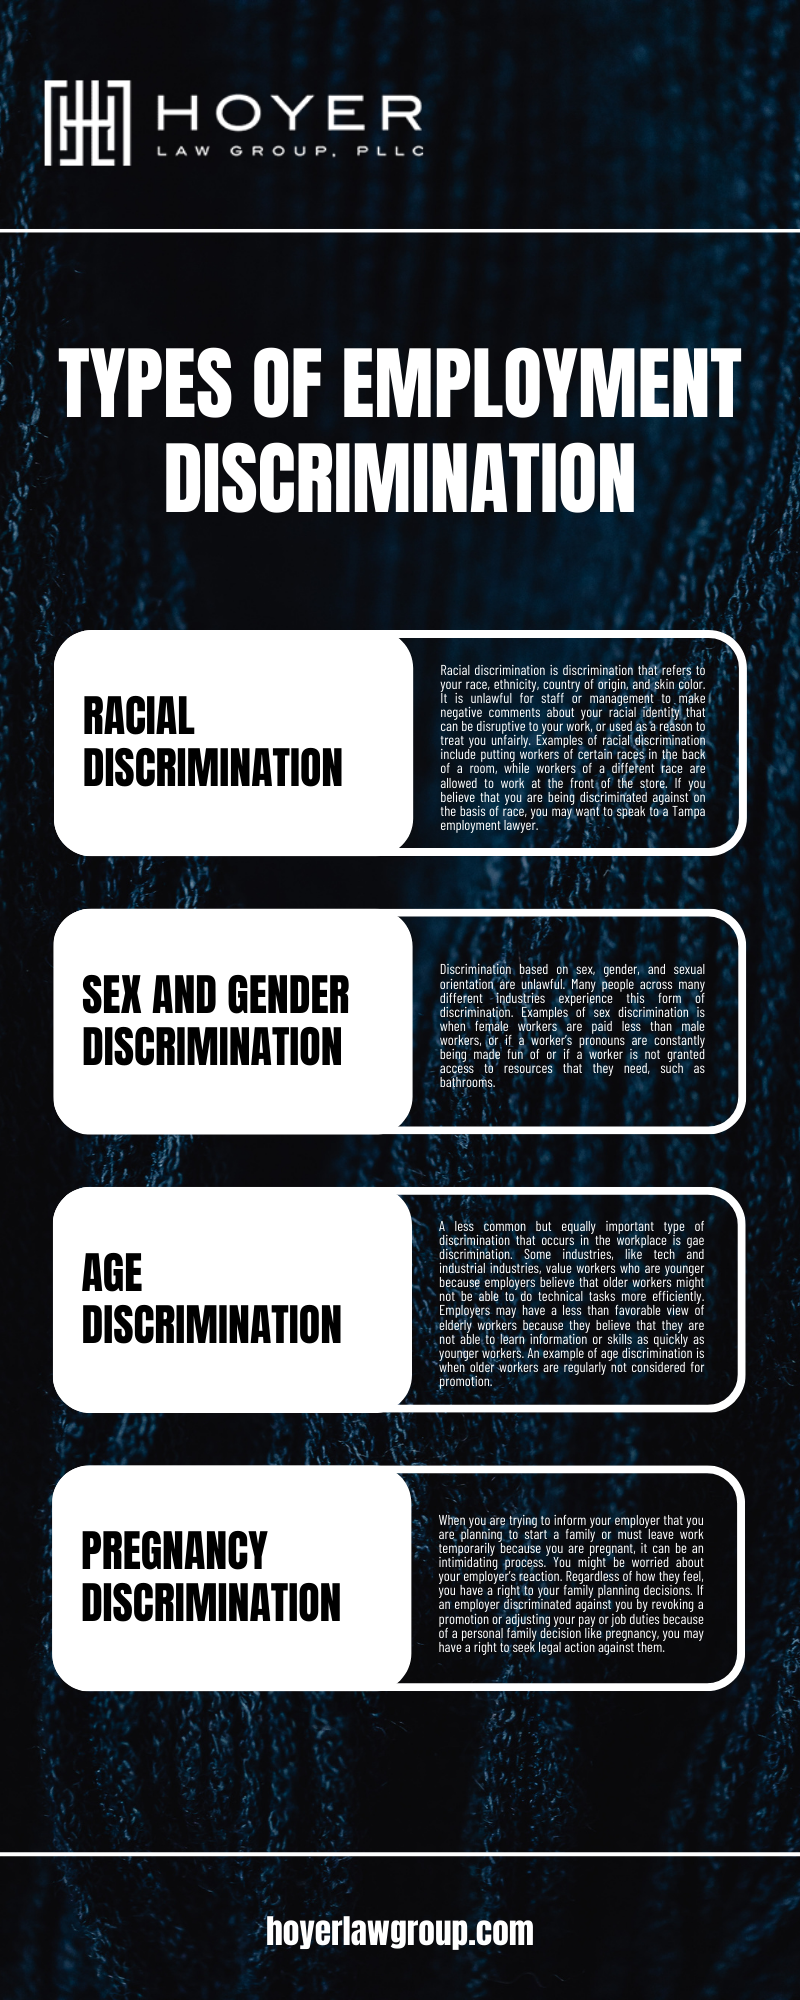 TYPES OF EMPLOYMENT DISCRIMINATION INFOGRAPHIC